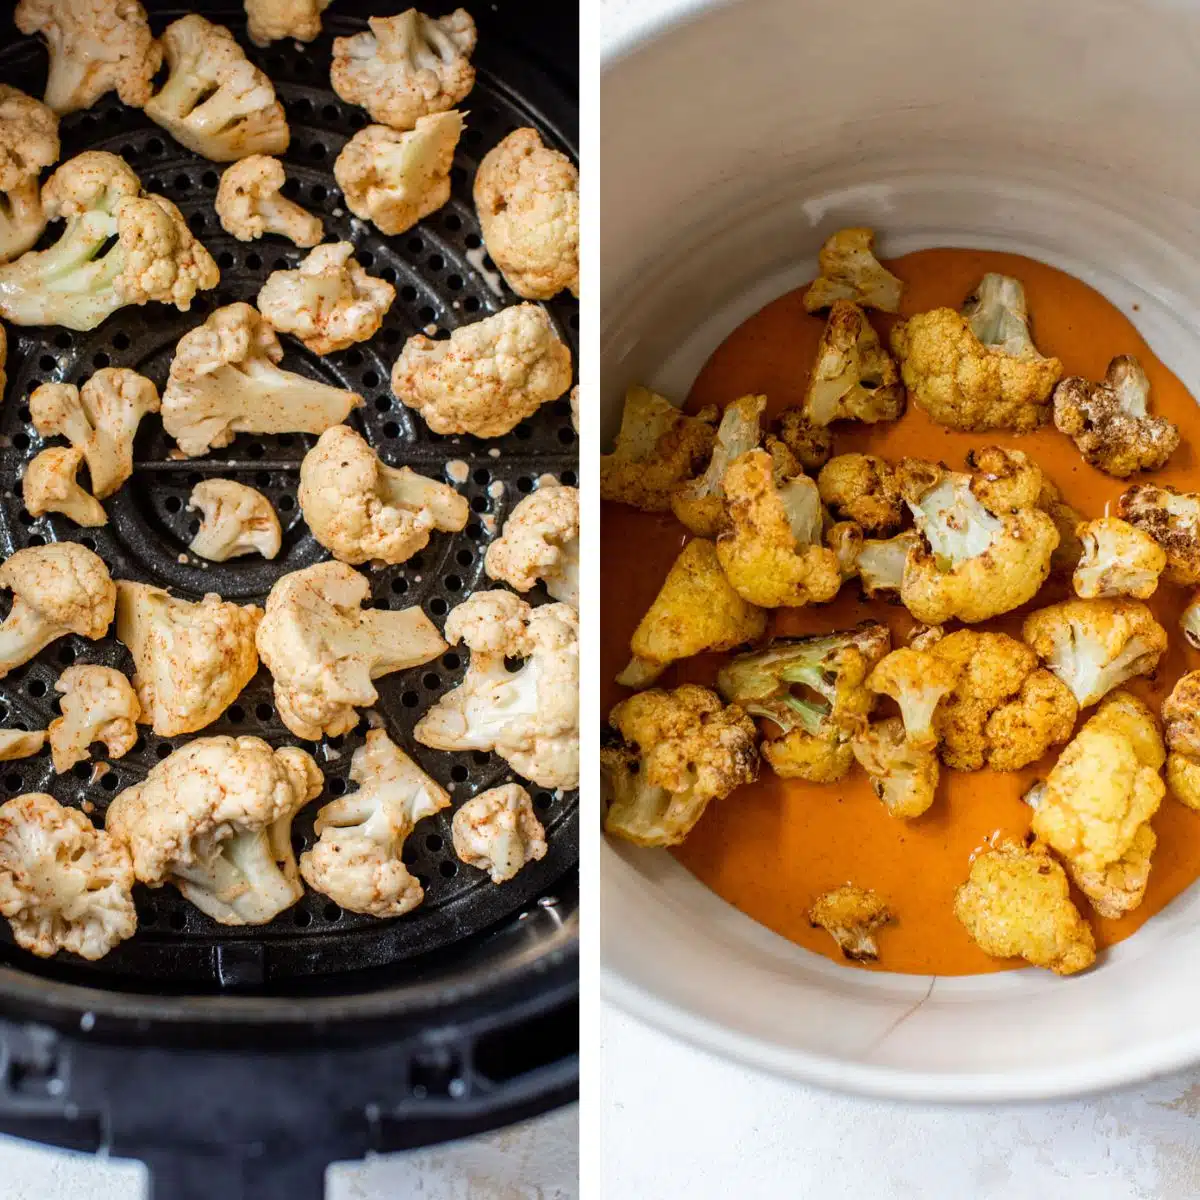 2 images: the left image shows cauliflower florets in an air fryer and the right image shows the cauliflower covered in hot sauce